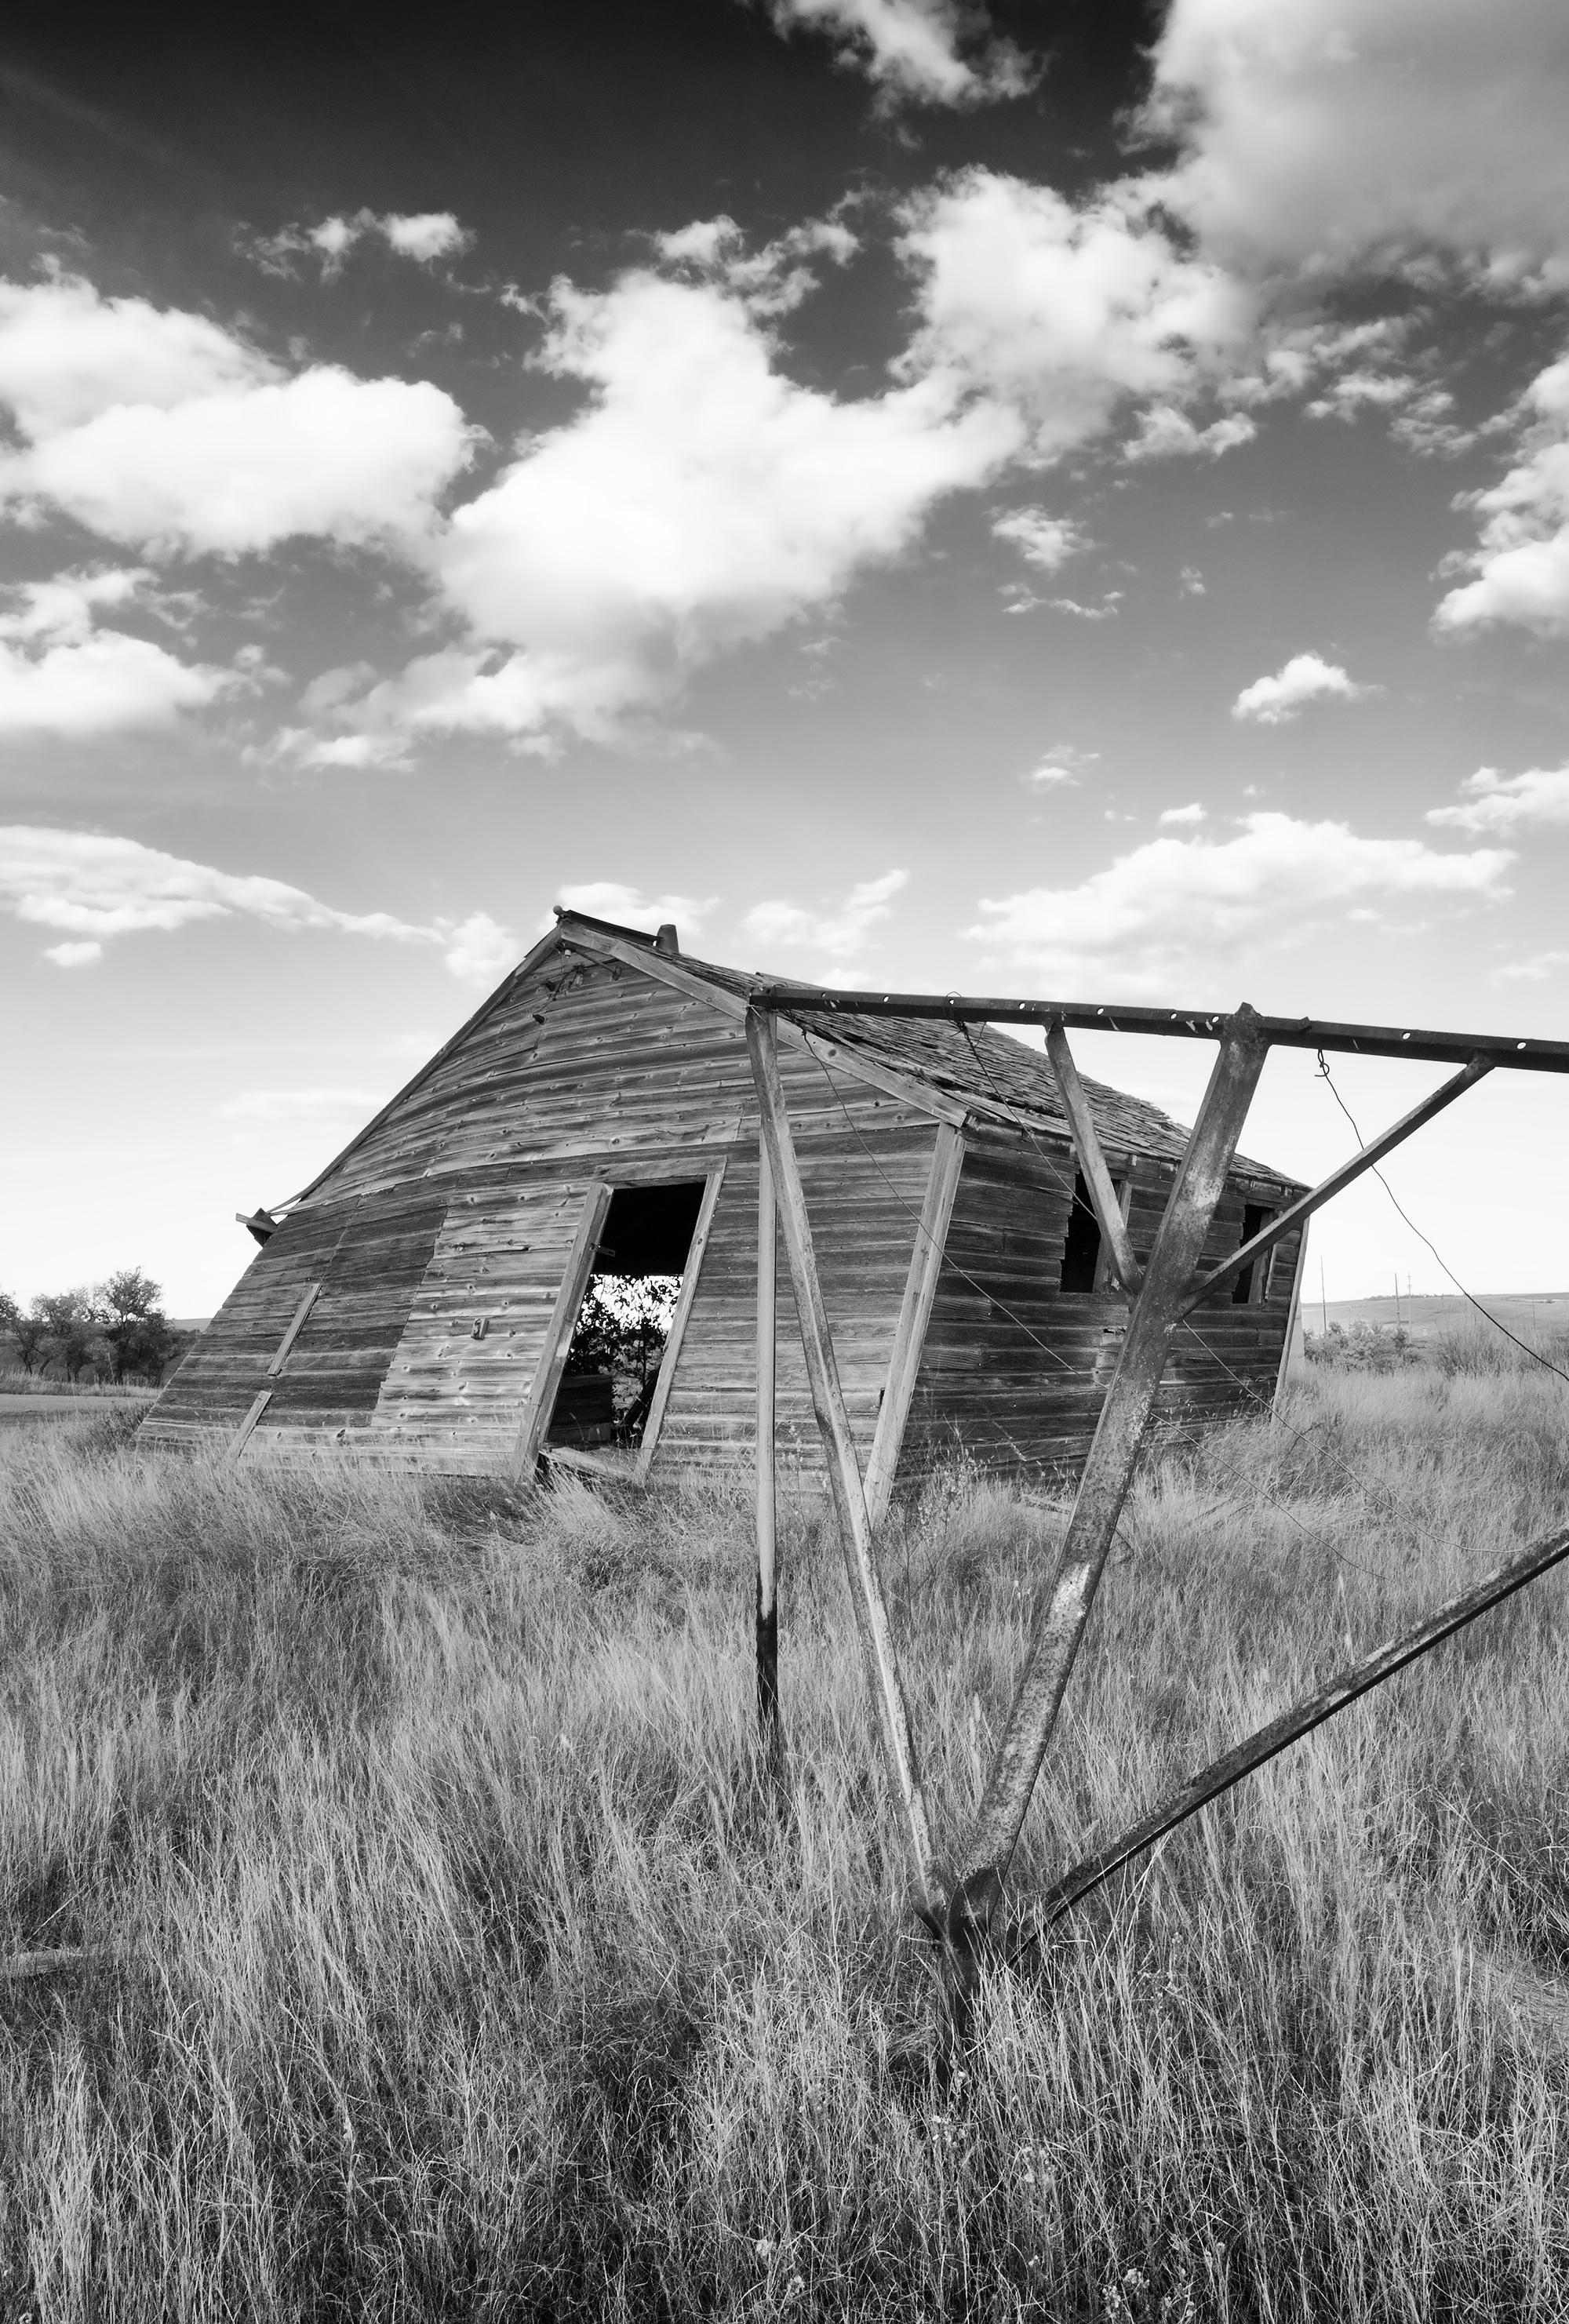 Rebecca Skinner’s “Alkabo II” is a 24 x 36 inch black and white photograph captured in a North Dakota ghost town. Dramatic sky frames a weathered structure in this beautiful contemporary landscape. The frameless metal print has a satin finish and is